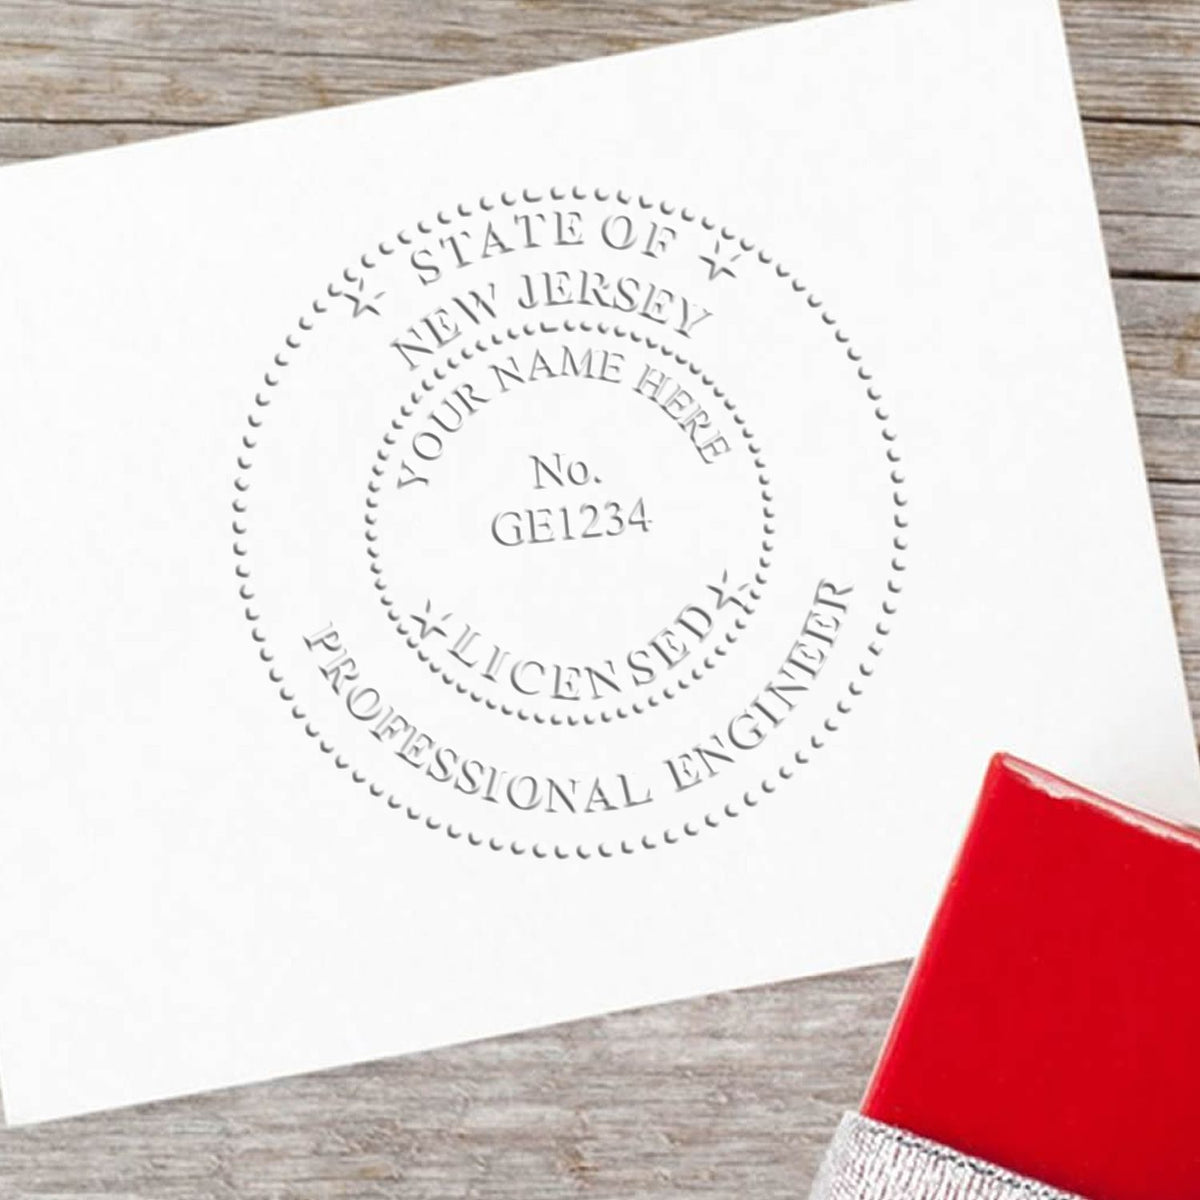 A photograph of the Hybrid New Jersey Engineer Seal stamp impression reveals a vivid, professional image of the on paper.